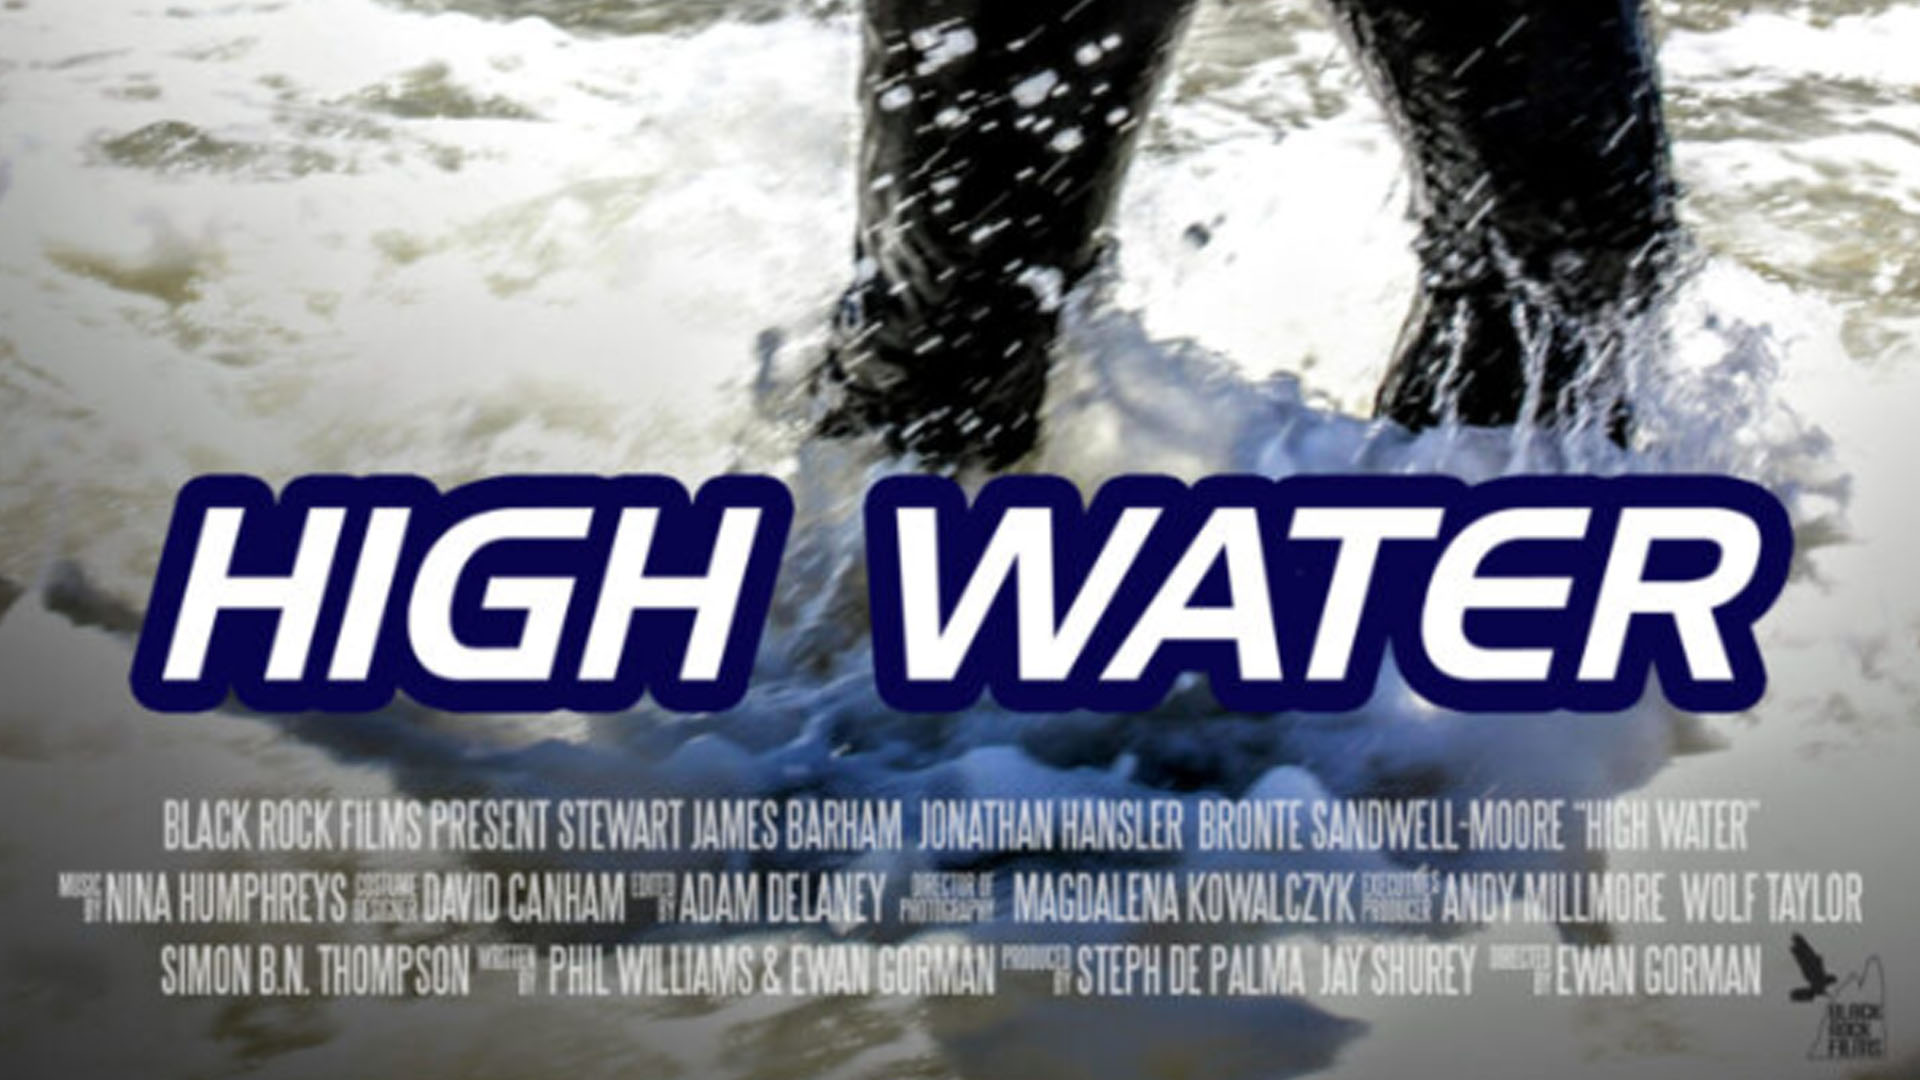 Producer – High Water